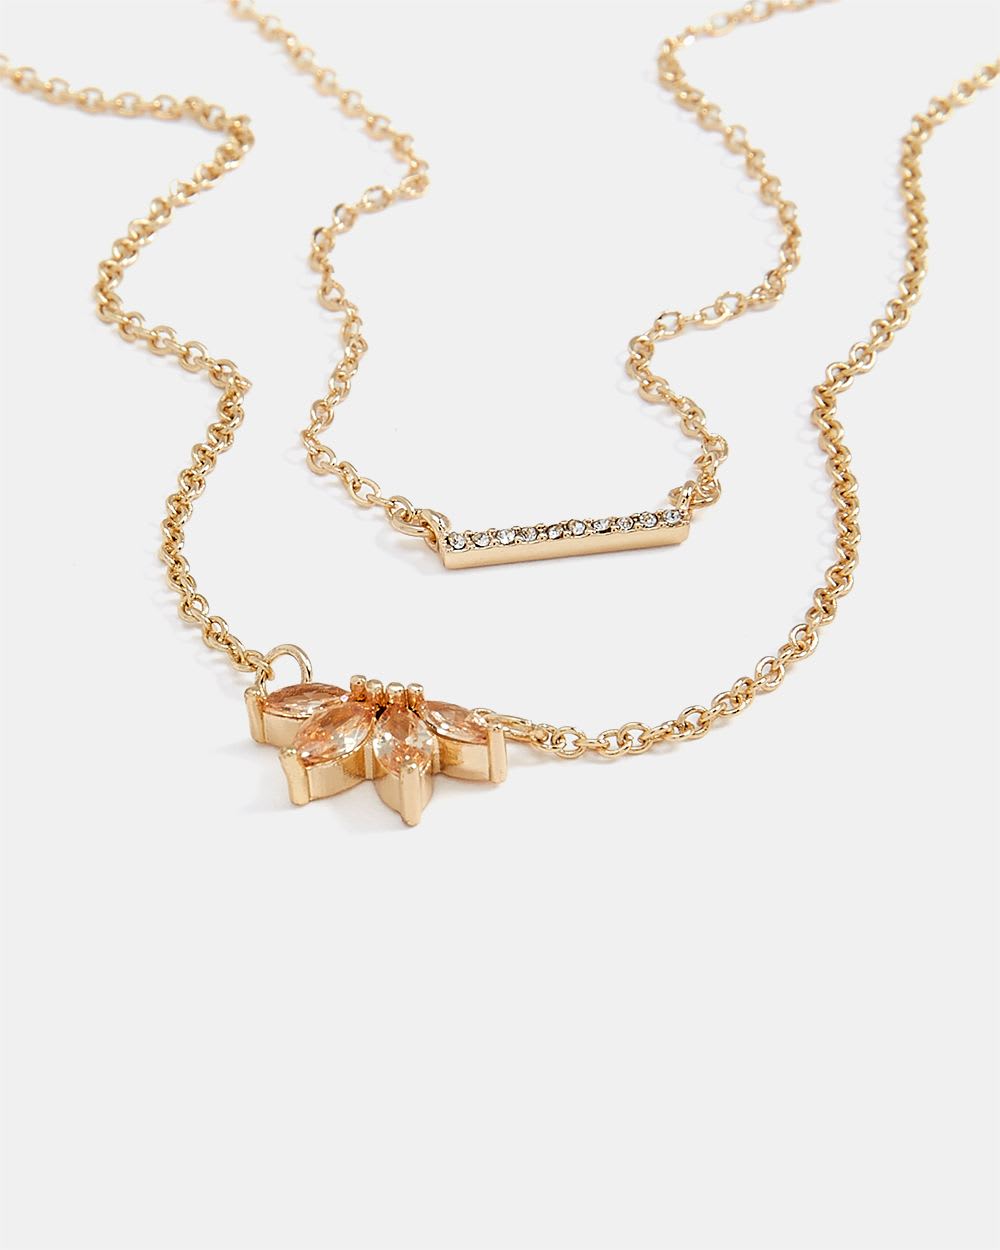 Two-Row Short Chain Necklace with Glass Stones